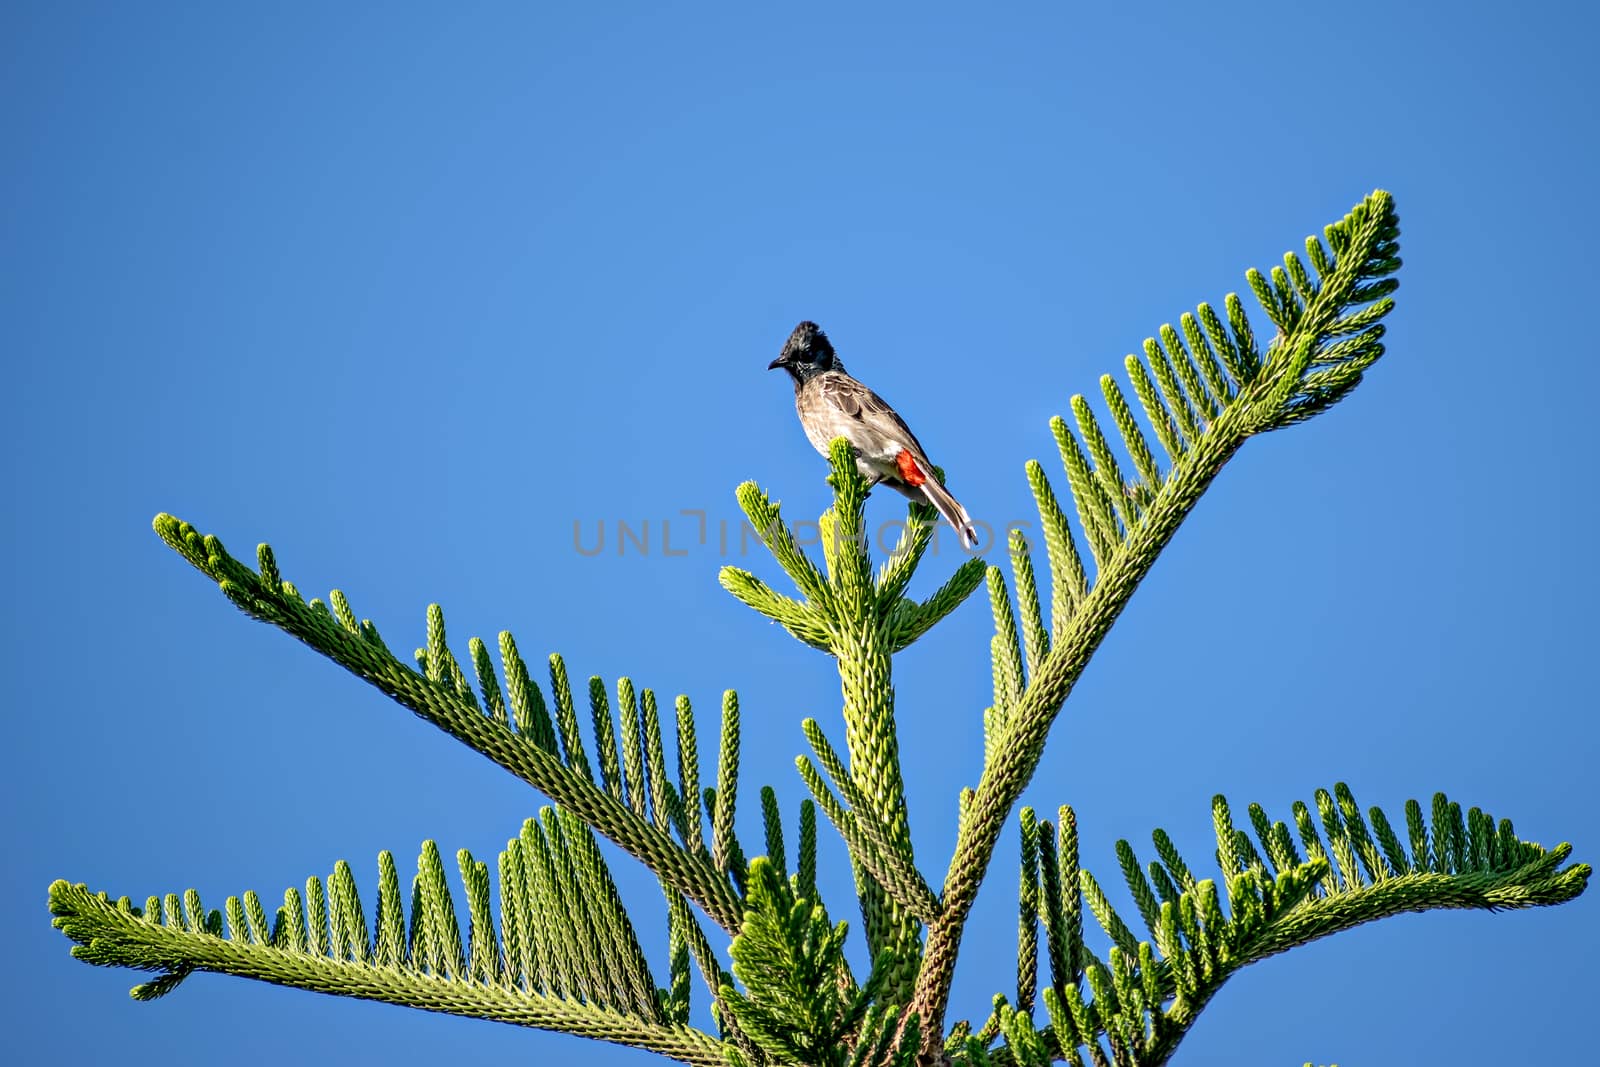 Red vented bulbul sitting on attractive Juniper tree branch leaves with clear blue sky background.